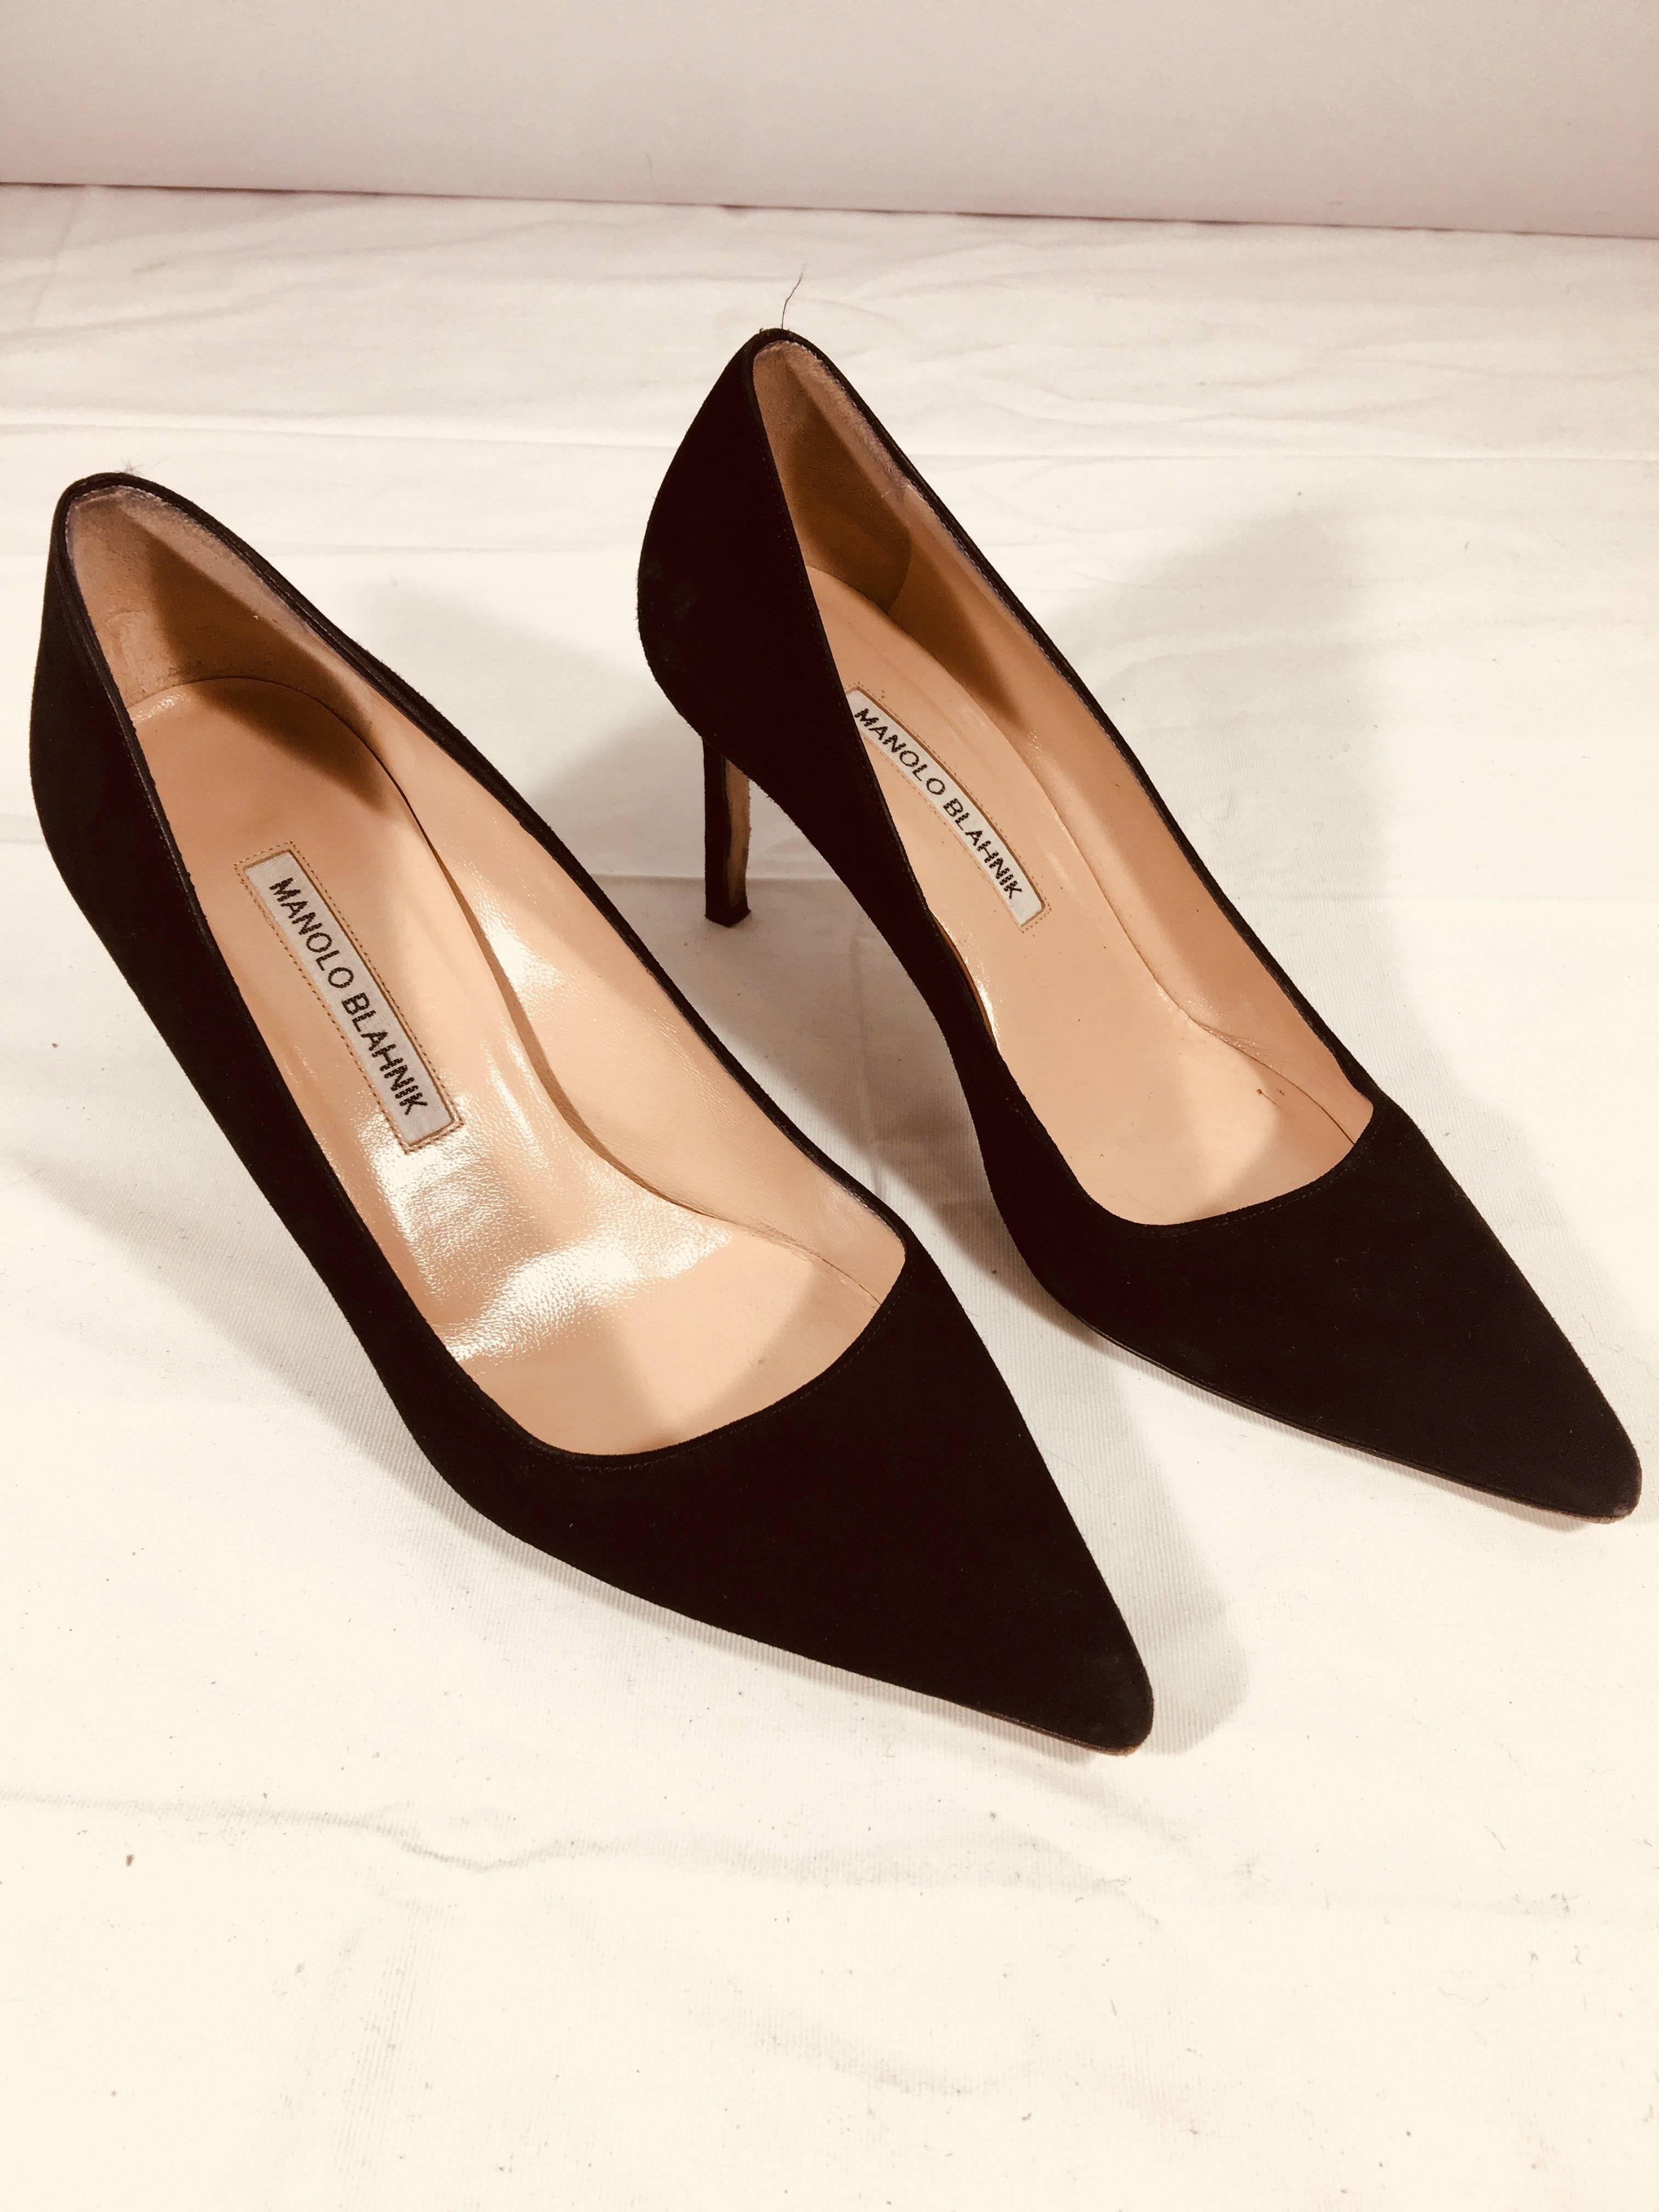 Manolo Blahnik Suede Pumps with a Pointed Toe.